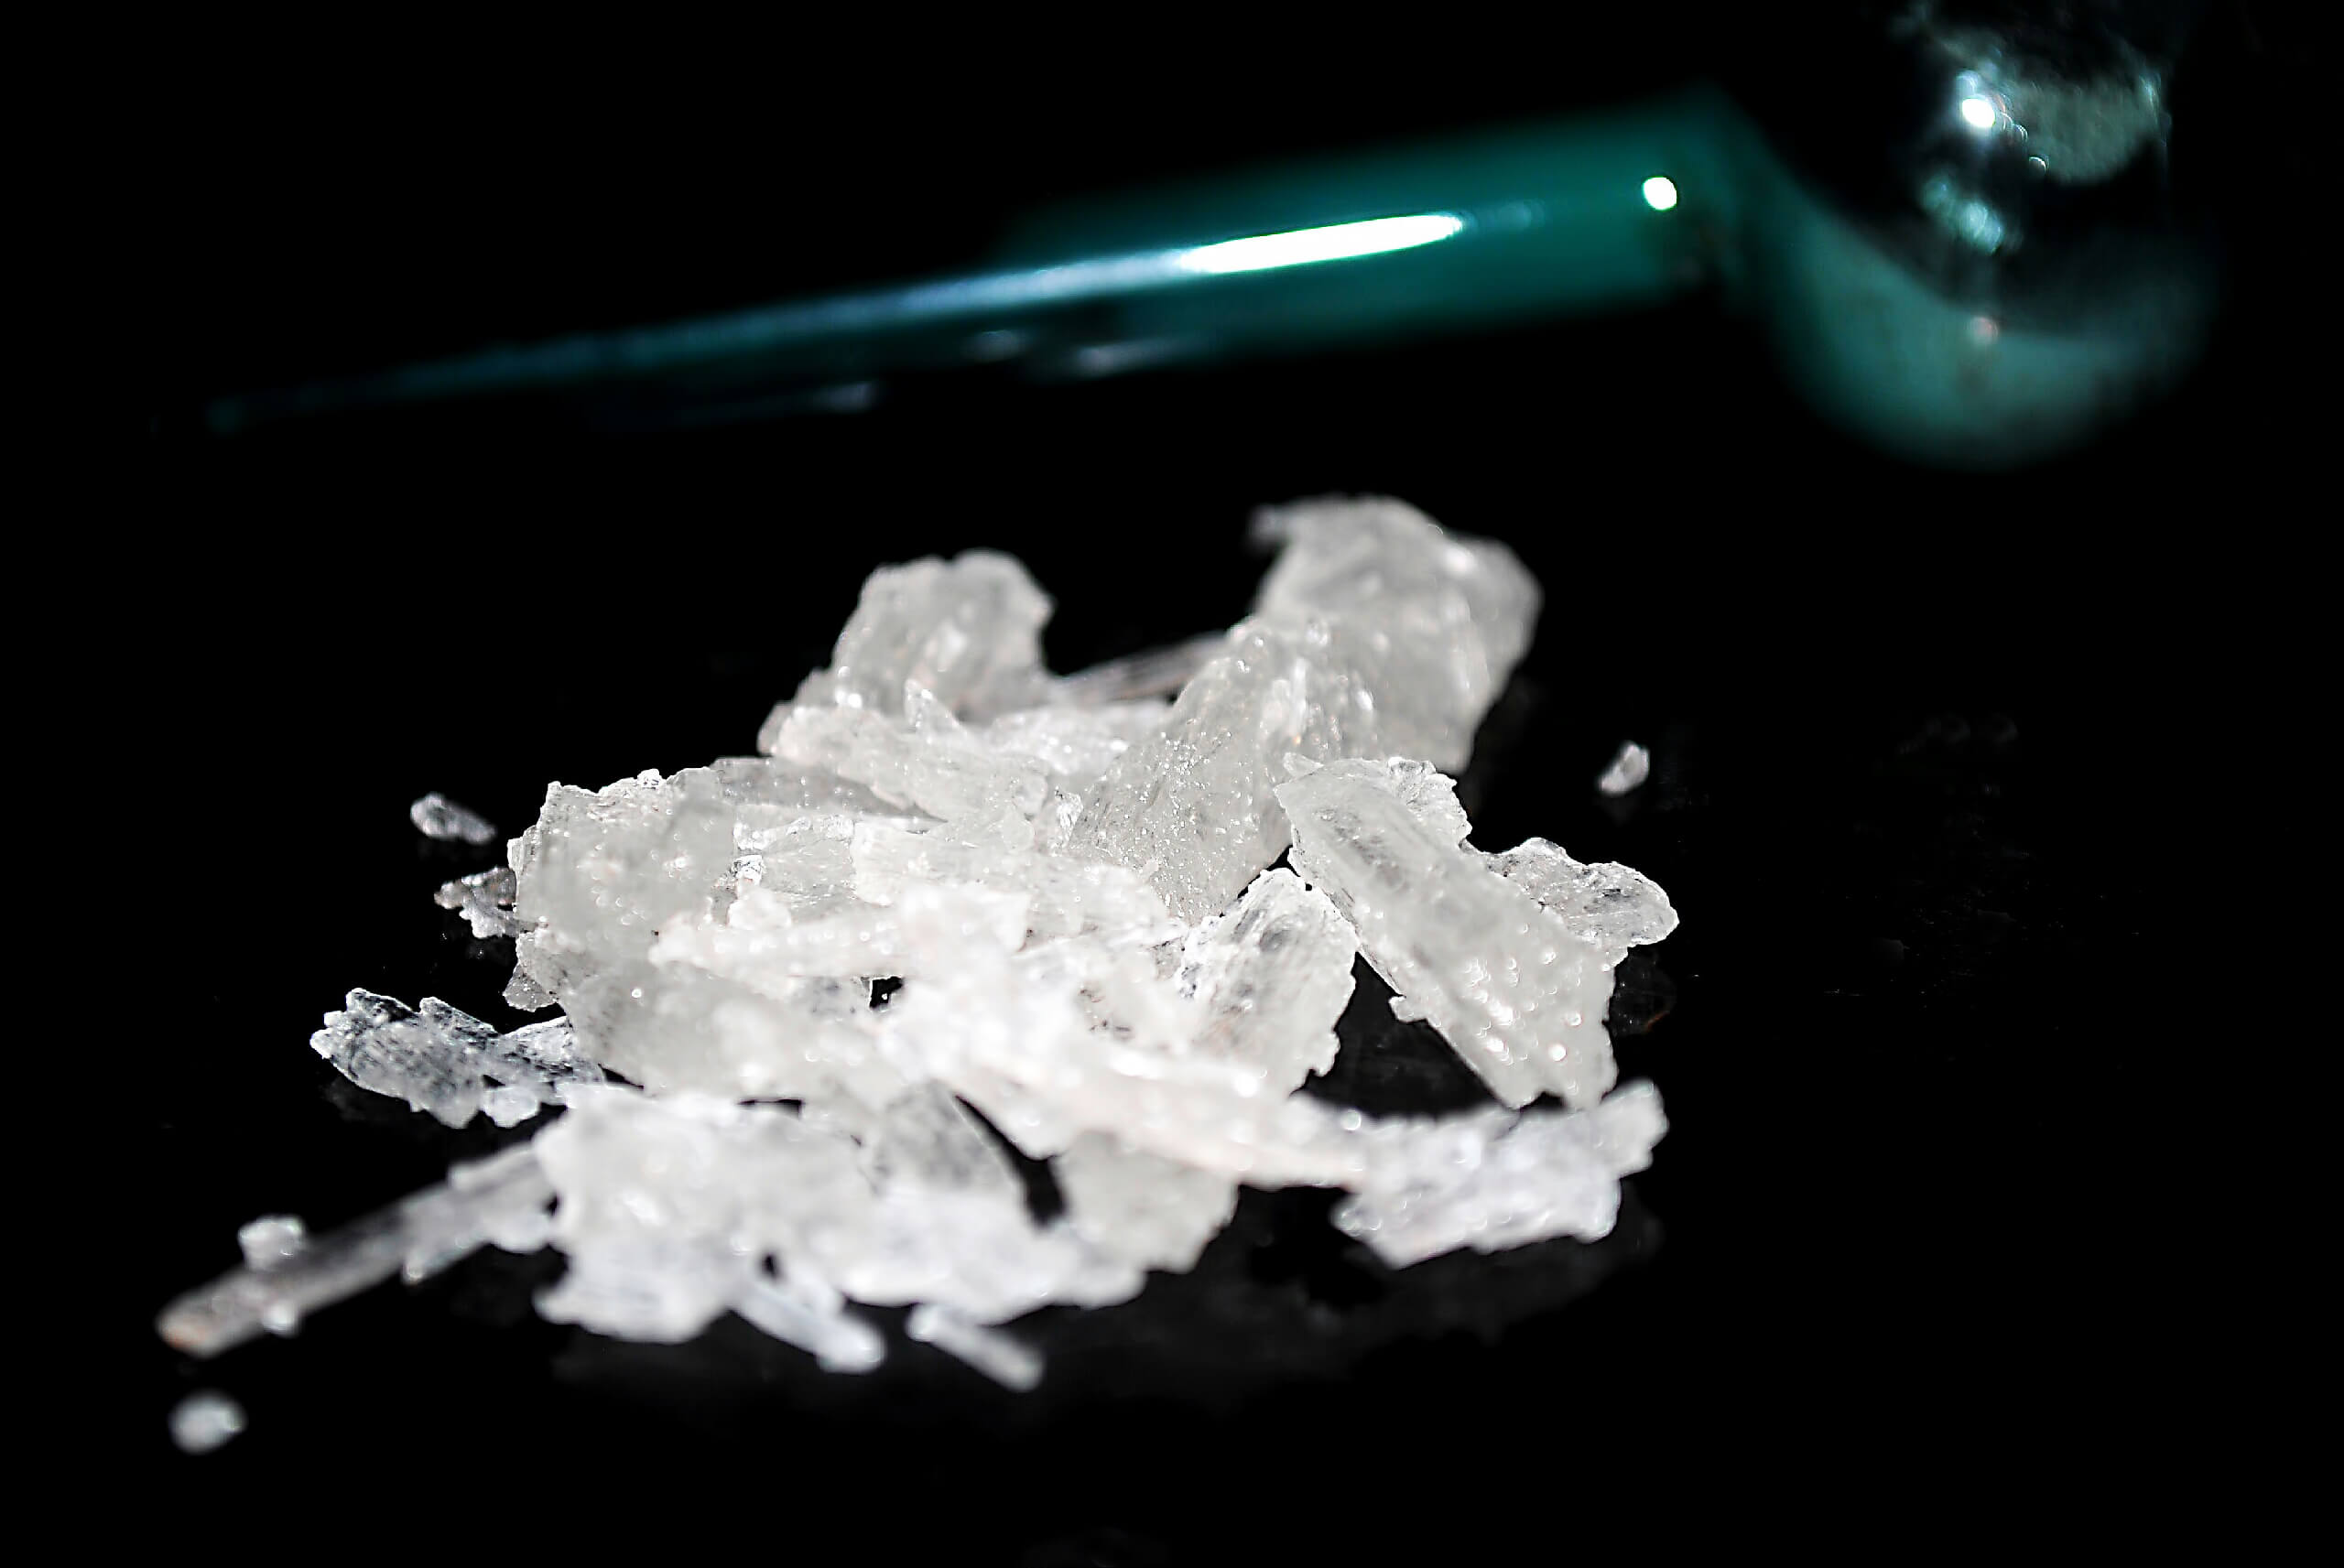 small pile of methamphetamine crystals with a meth pipe in background